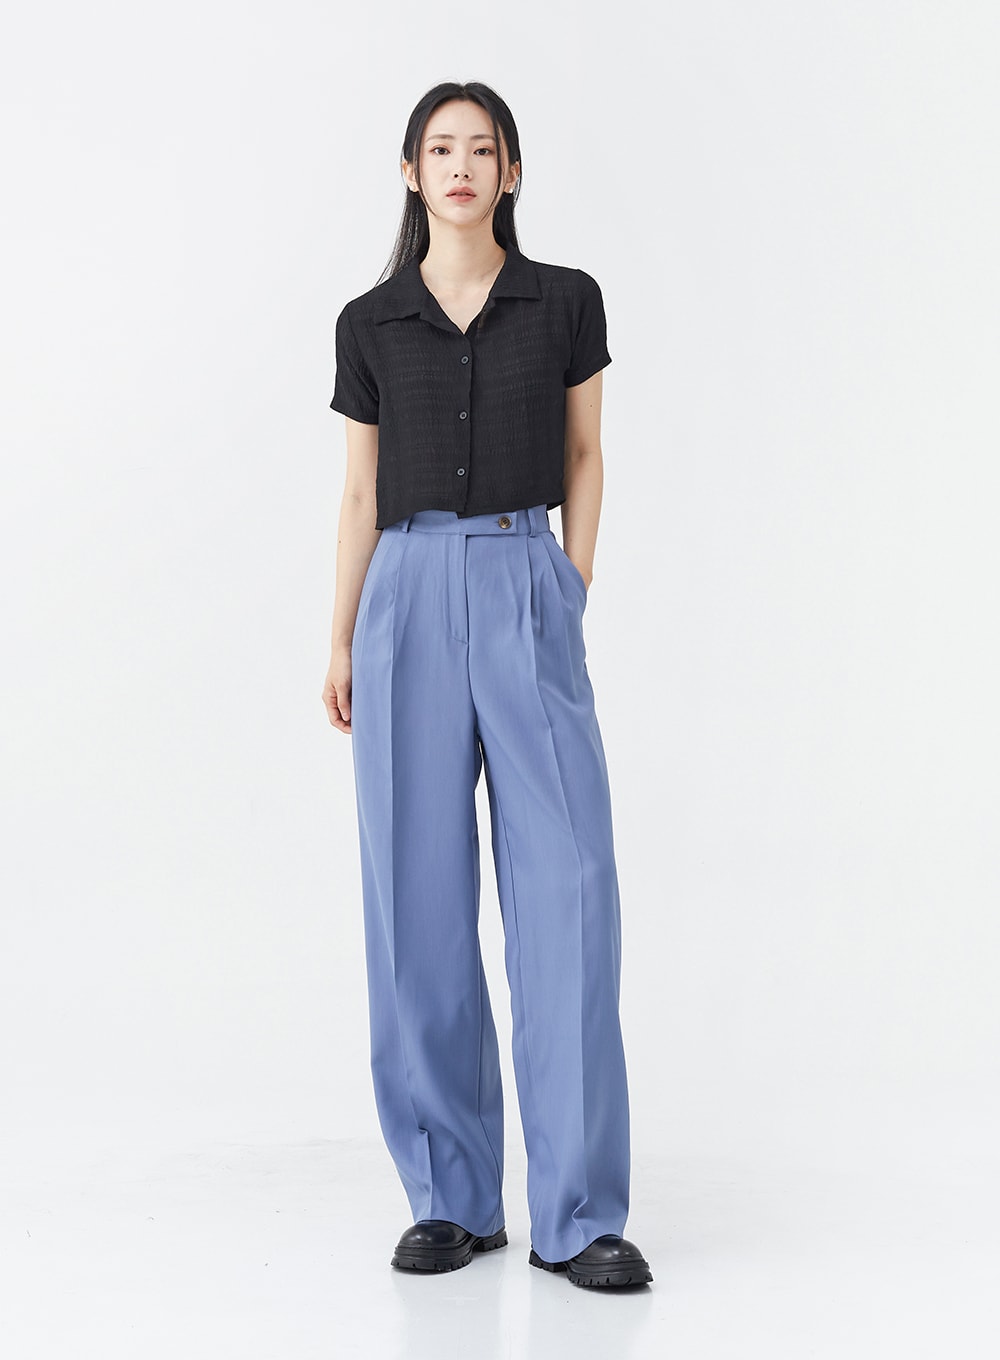 Cool Wrinkle Cropped Blouse with Collar OG12